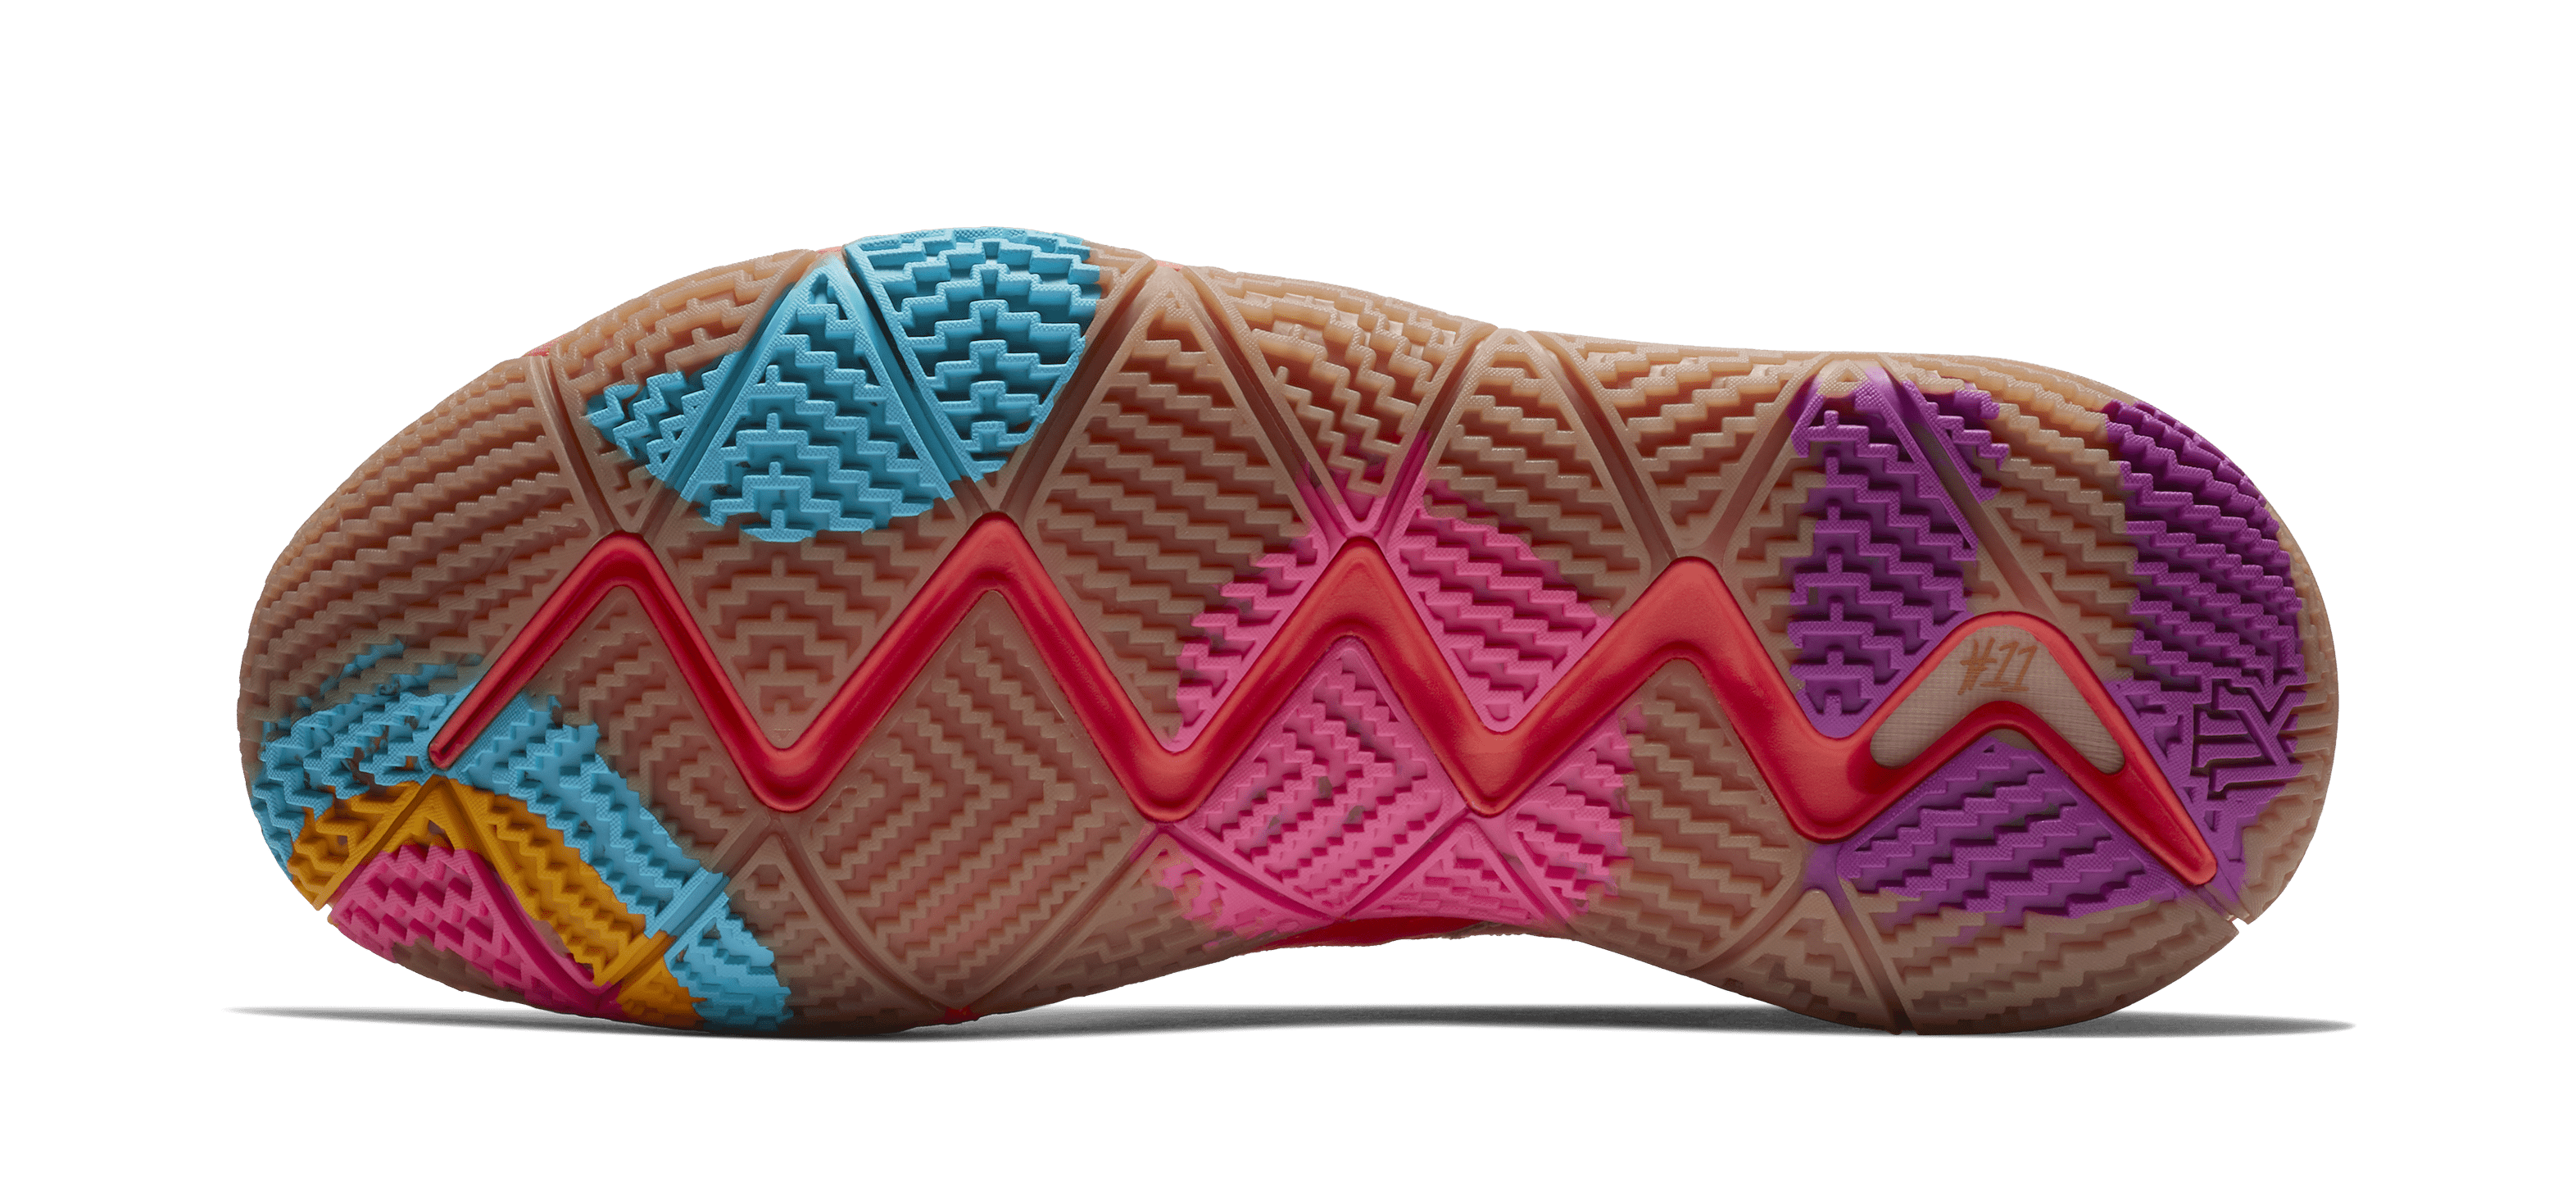 Nike Kyrie 4 &#x27;Lucky Charms&#x27; BV0428-600 (Sole)